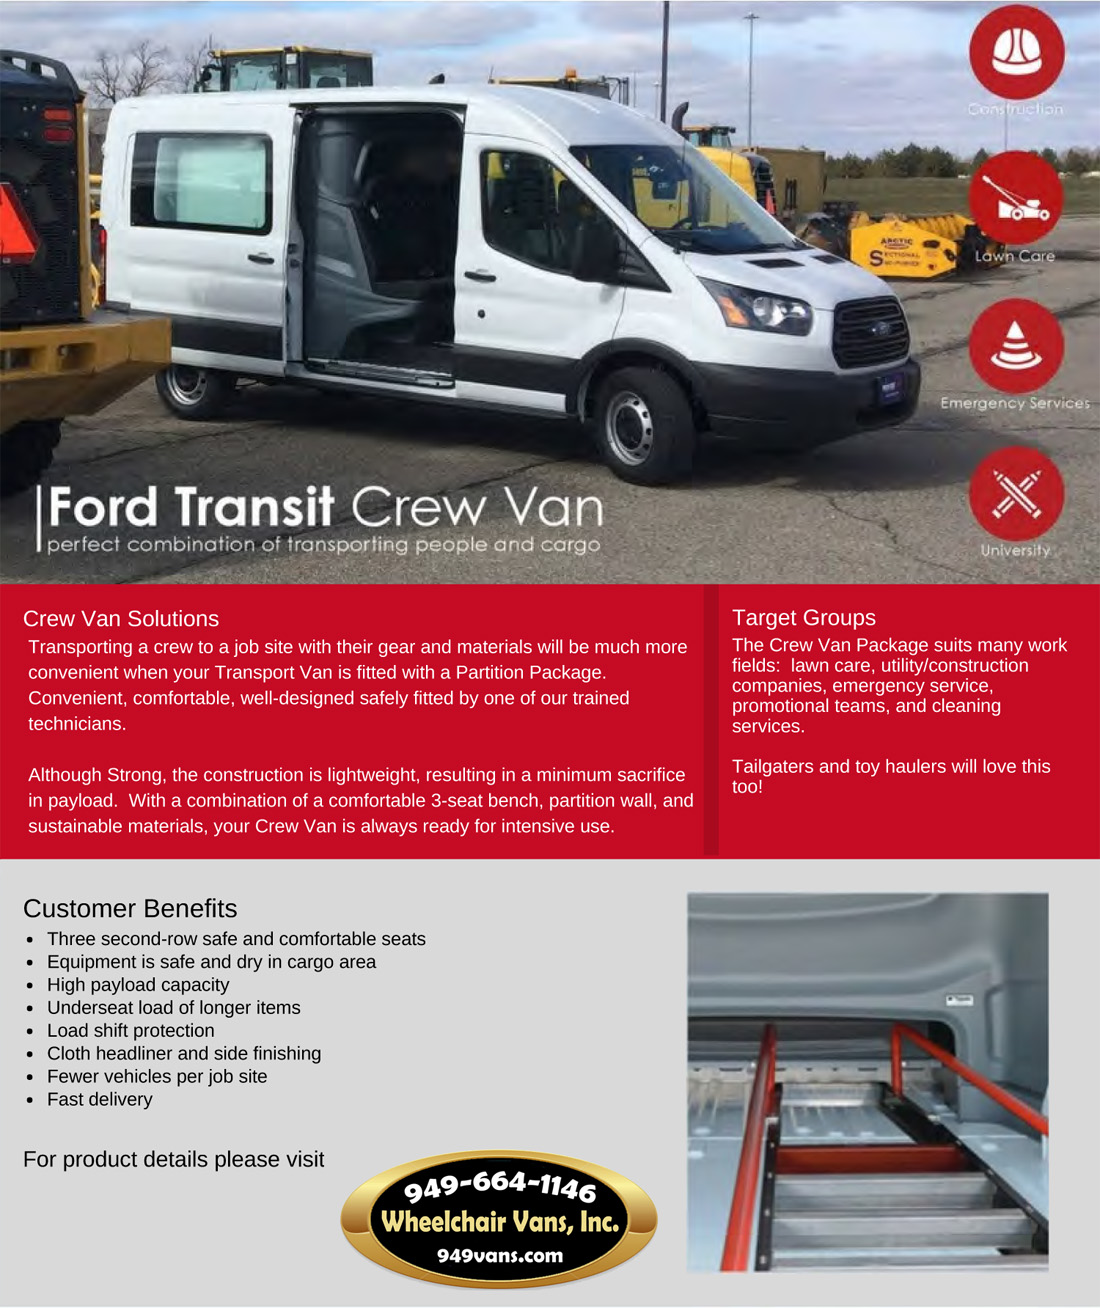 Ford Transit Cargo and Crew FR Conversion